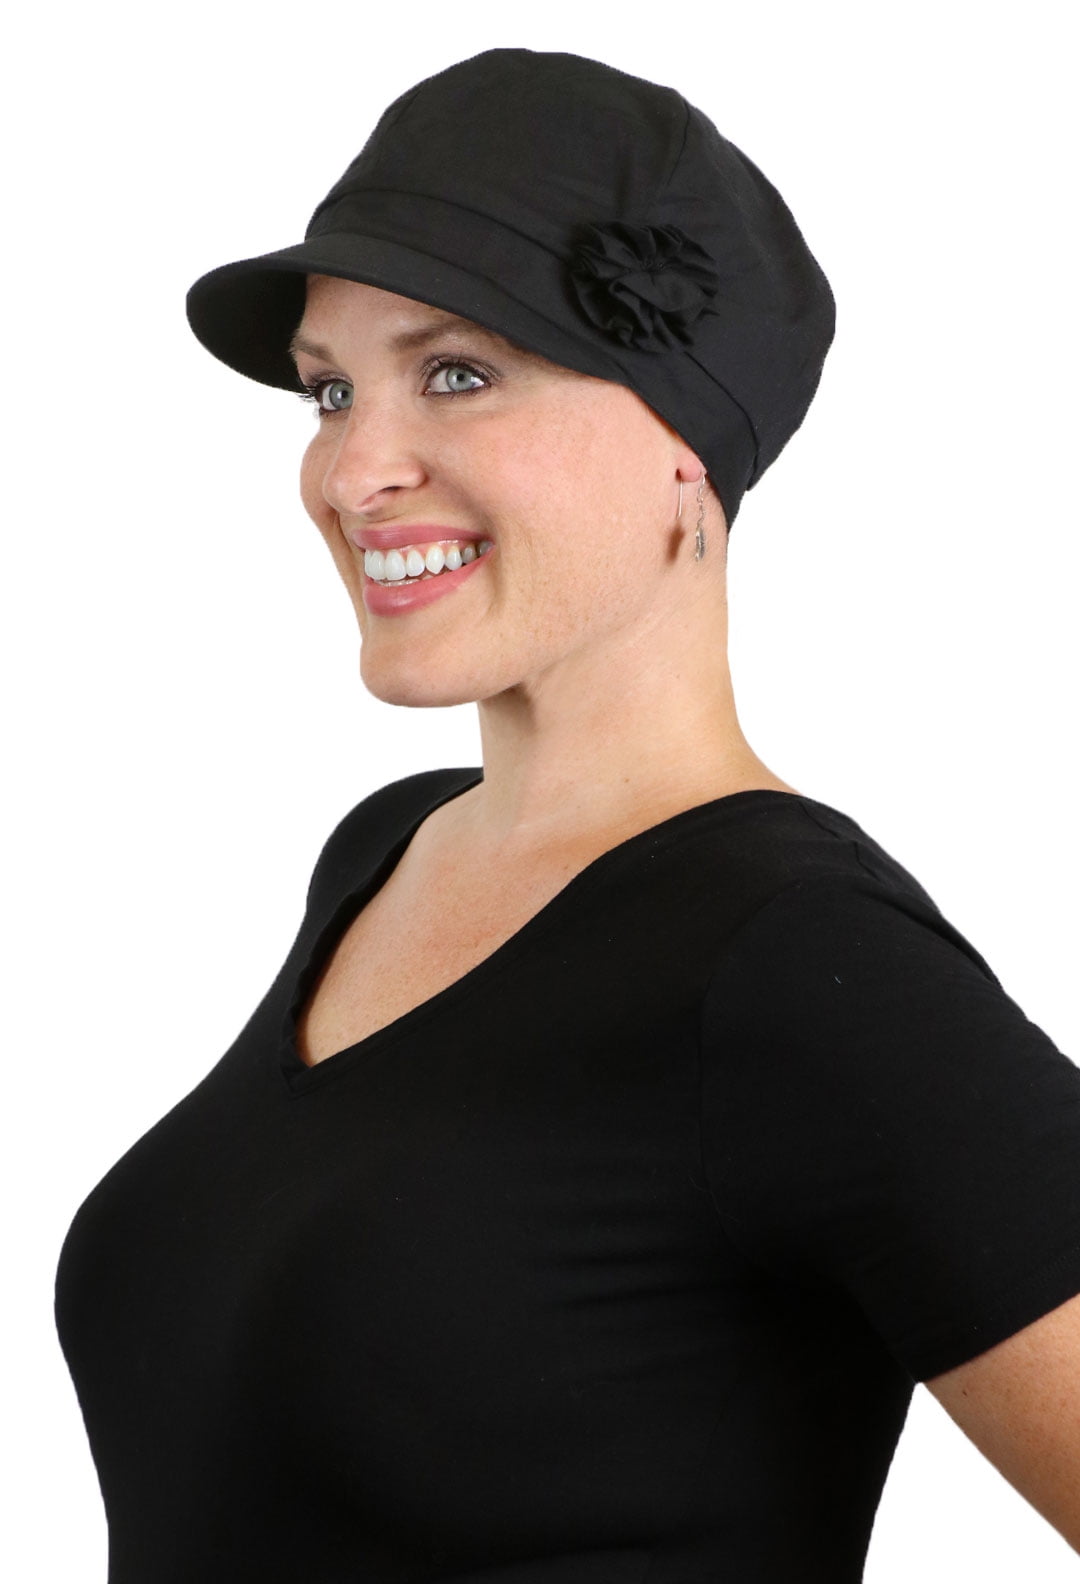 Cotton Unisex Cap for Cancer Hair Loss Sleeping Cap Chemotherapy Hat Hot Sale 